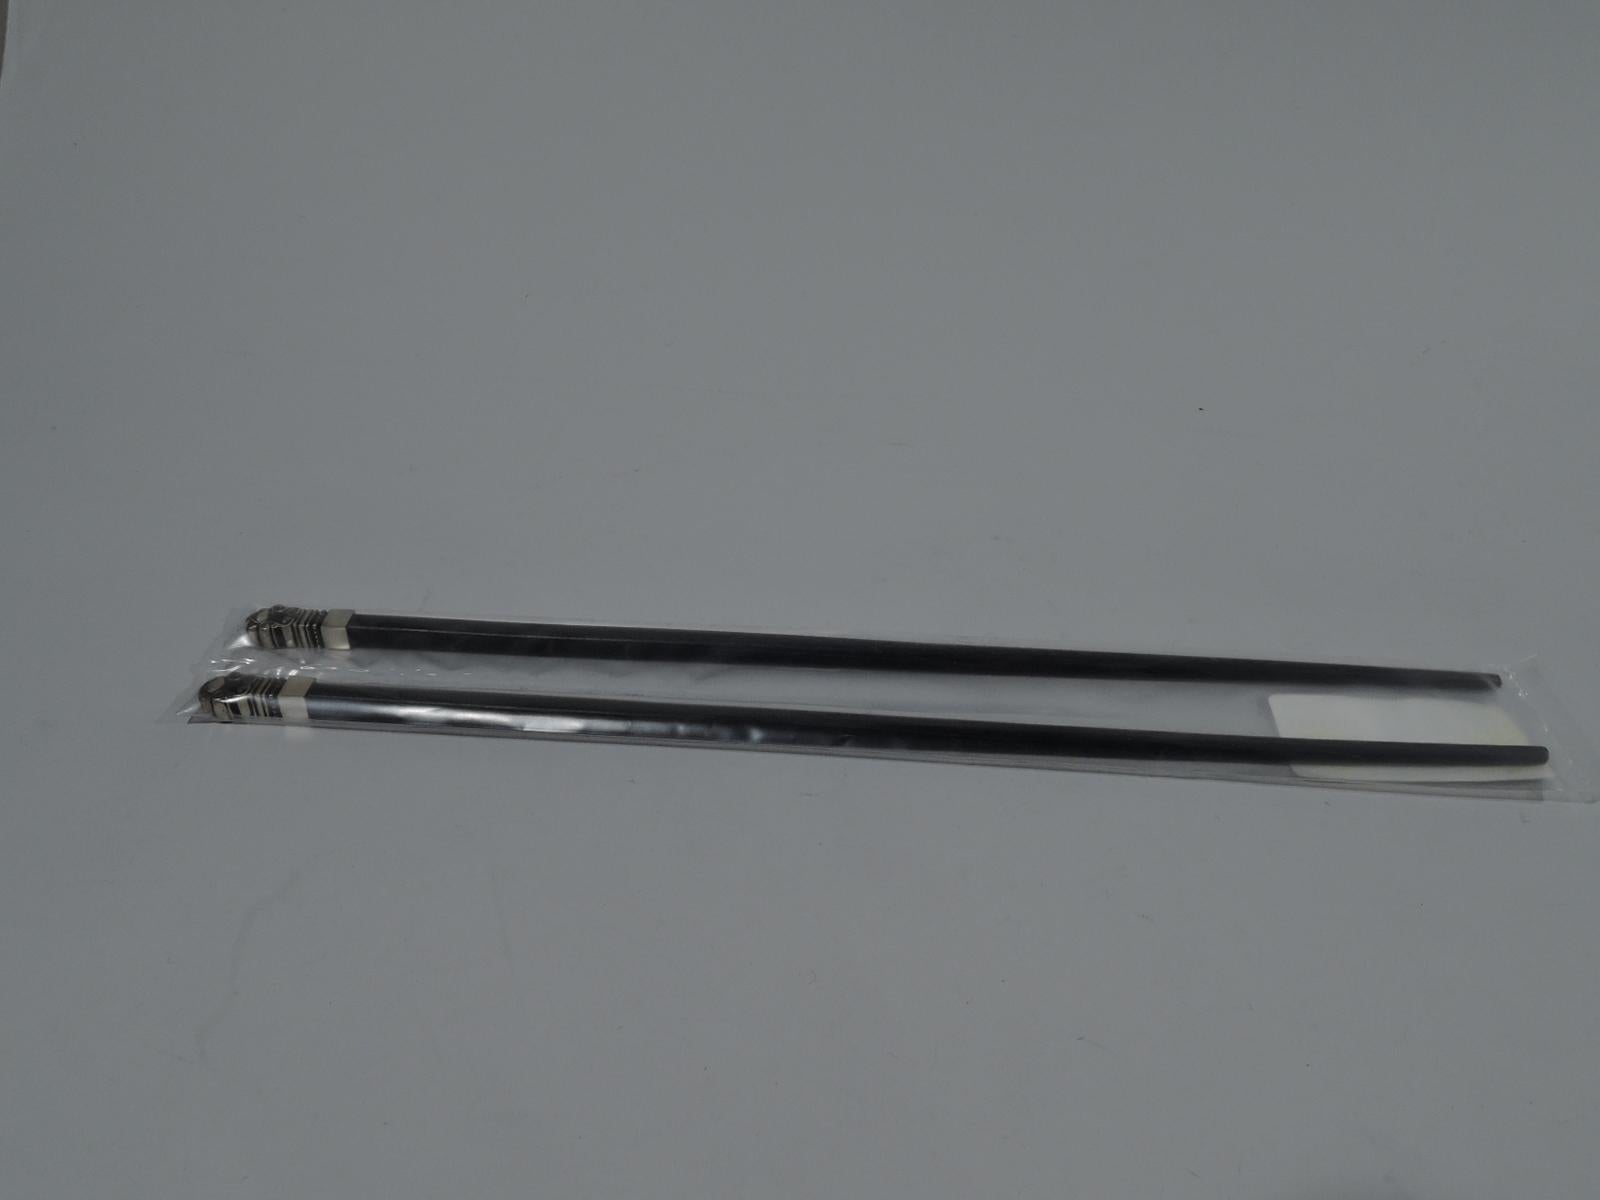 Pair of chopsticks in Acorn pattern. Made by Georg Jensen in Copenhagen. Tapering ebonized shaft with an acorn terminal. A modern and functional application of Johan Rohde’s classic motif. Postwar hallmark. In original sealed plastic bag and box